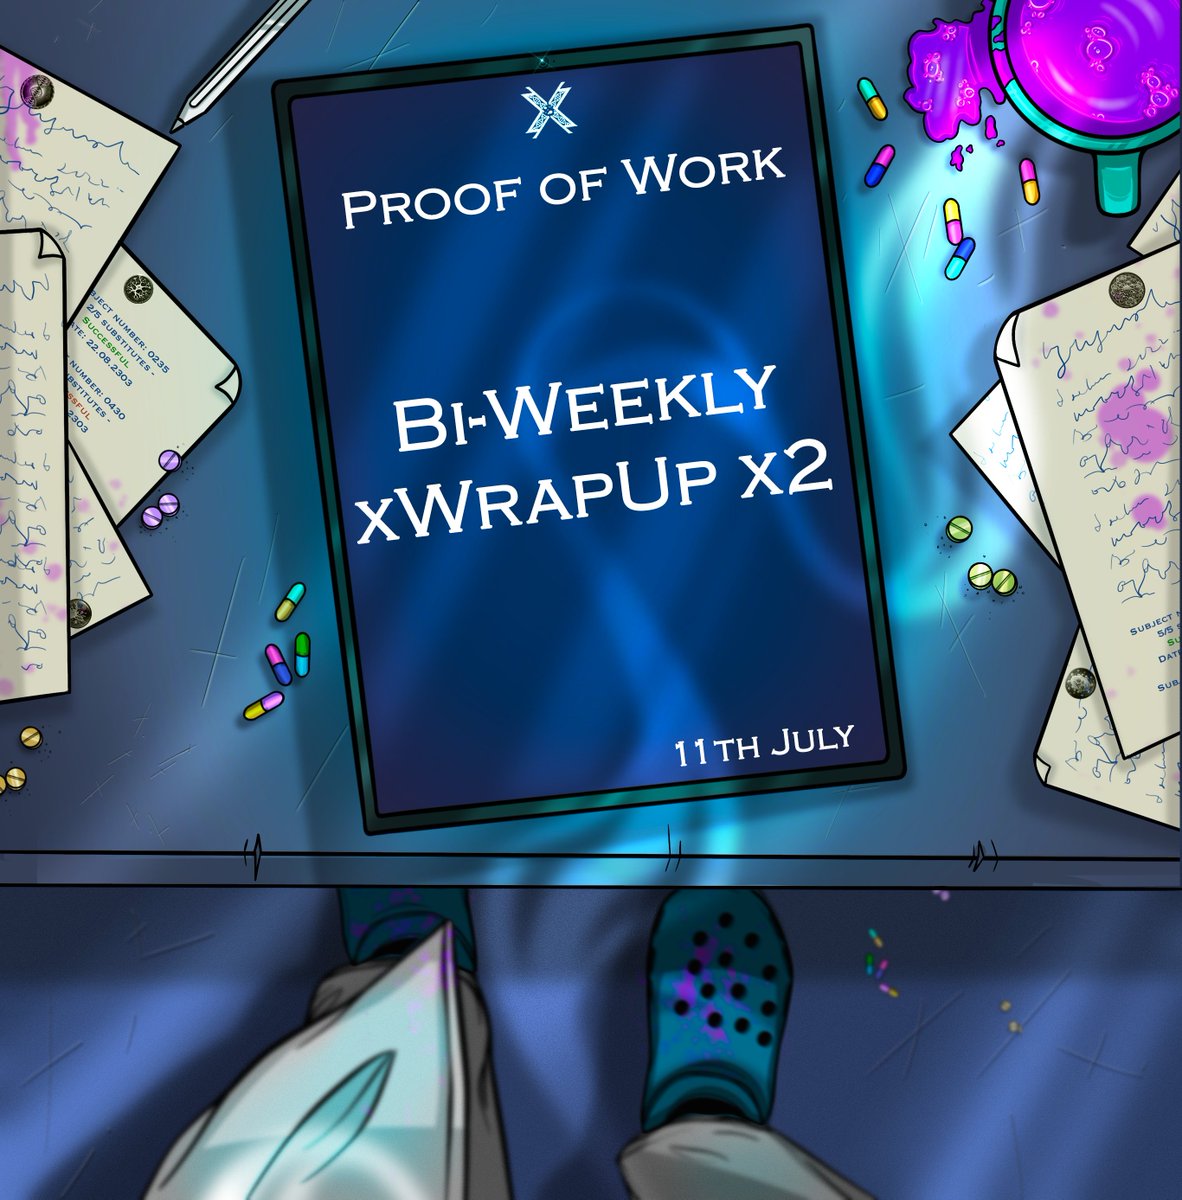 ✖️PROOF OF WORK✖️

Let's delve into the most recent accomplishments and developments, and take a sneak peek at what lays ahead.

A thread🧵 #FollowTheX #builtonmultiversx